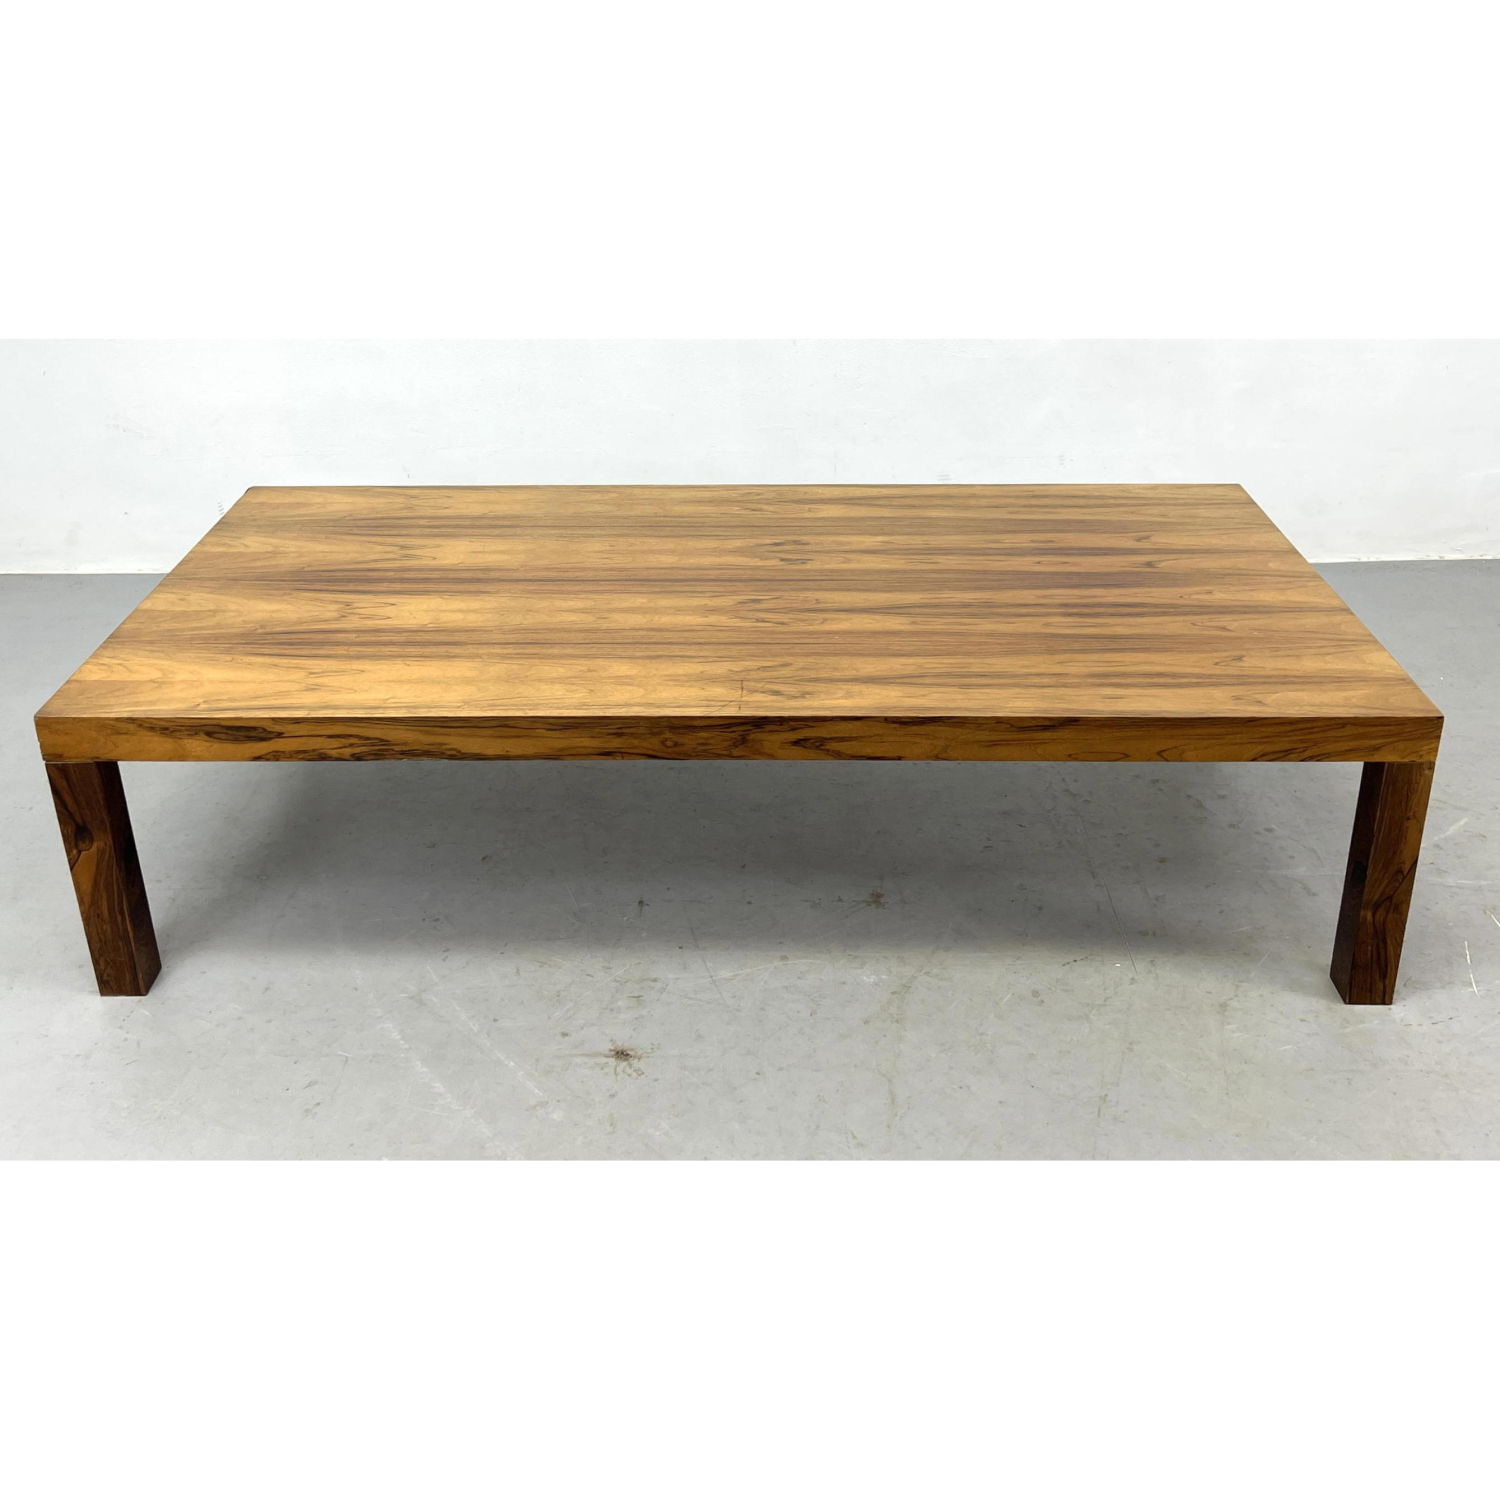 Oversized Rosewood Coffee Table.